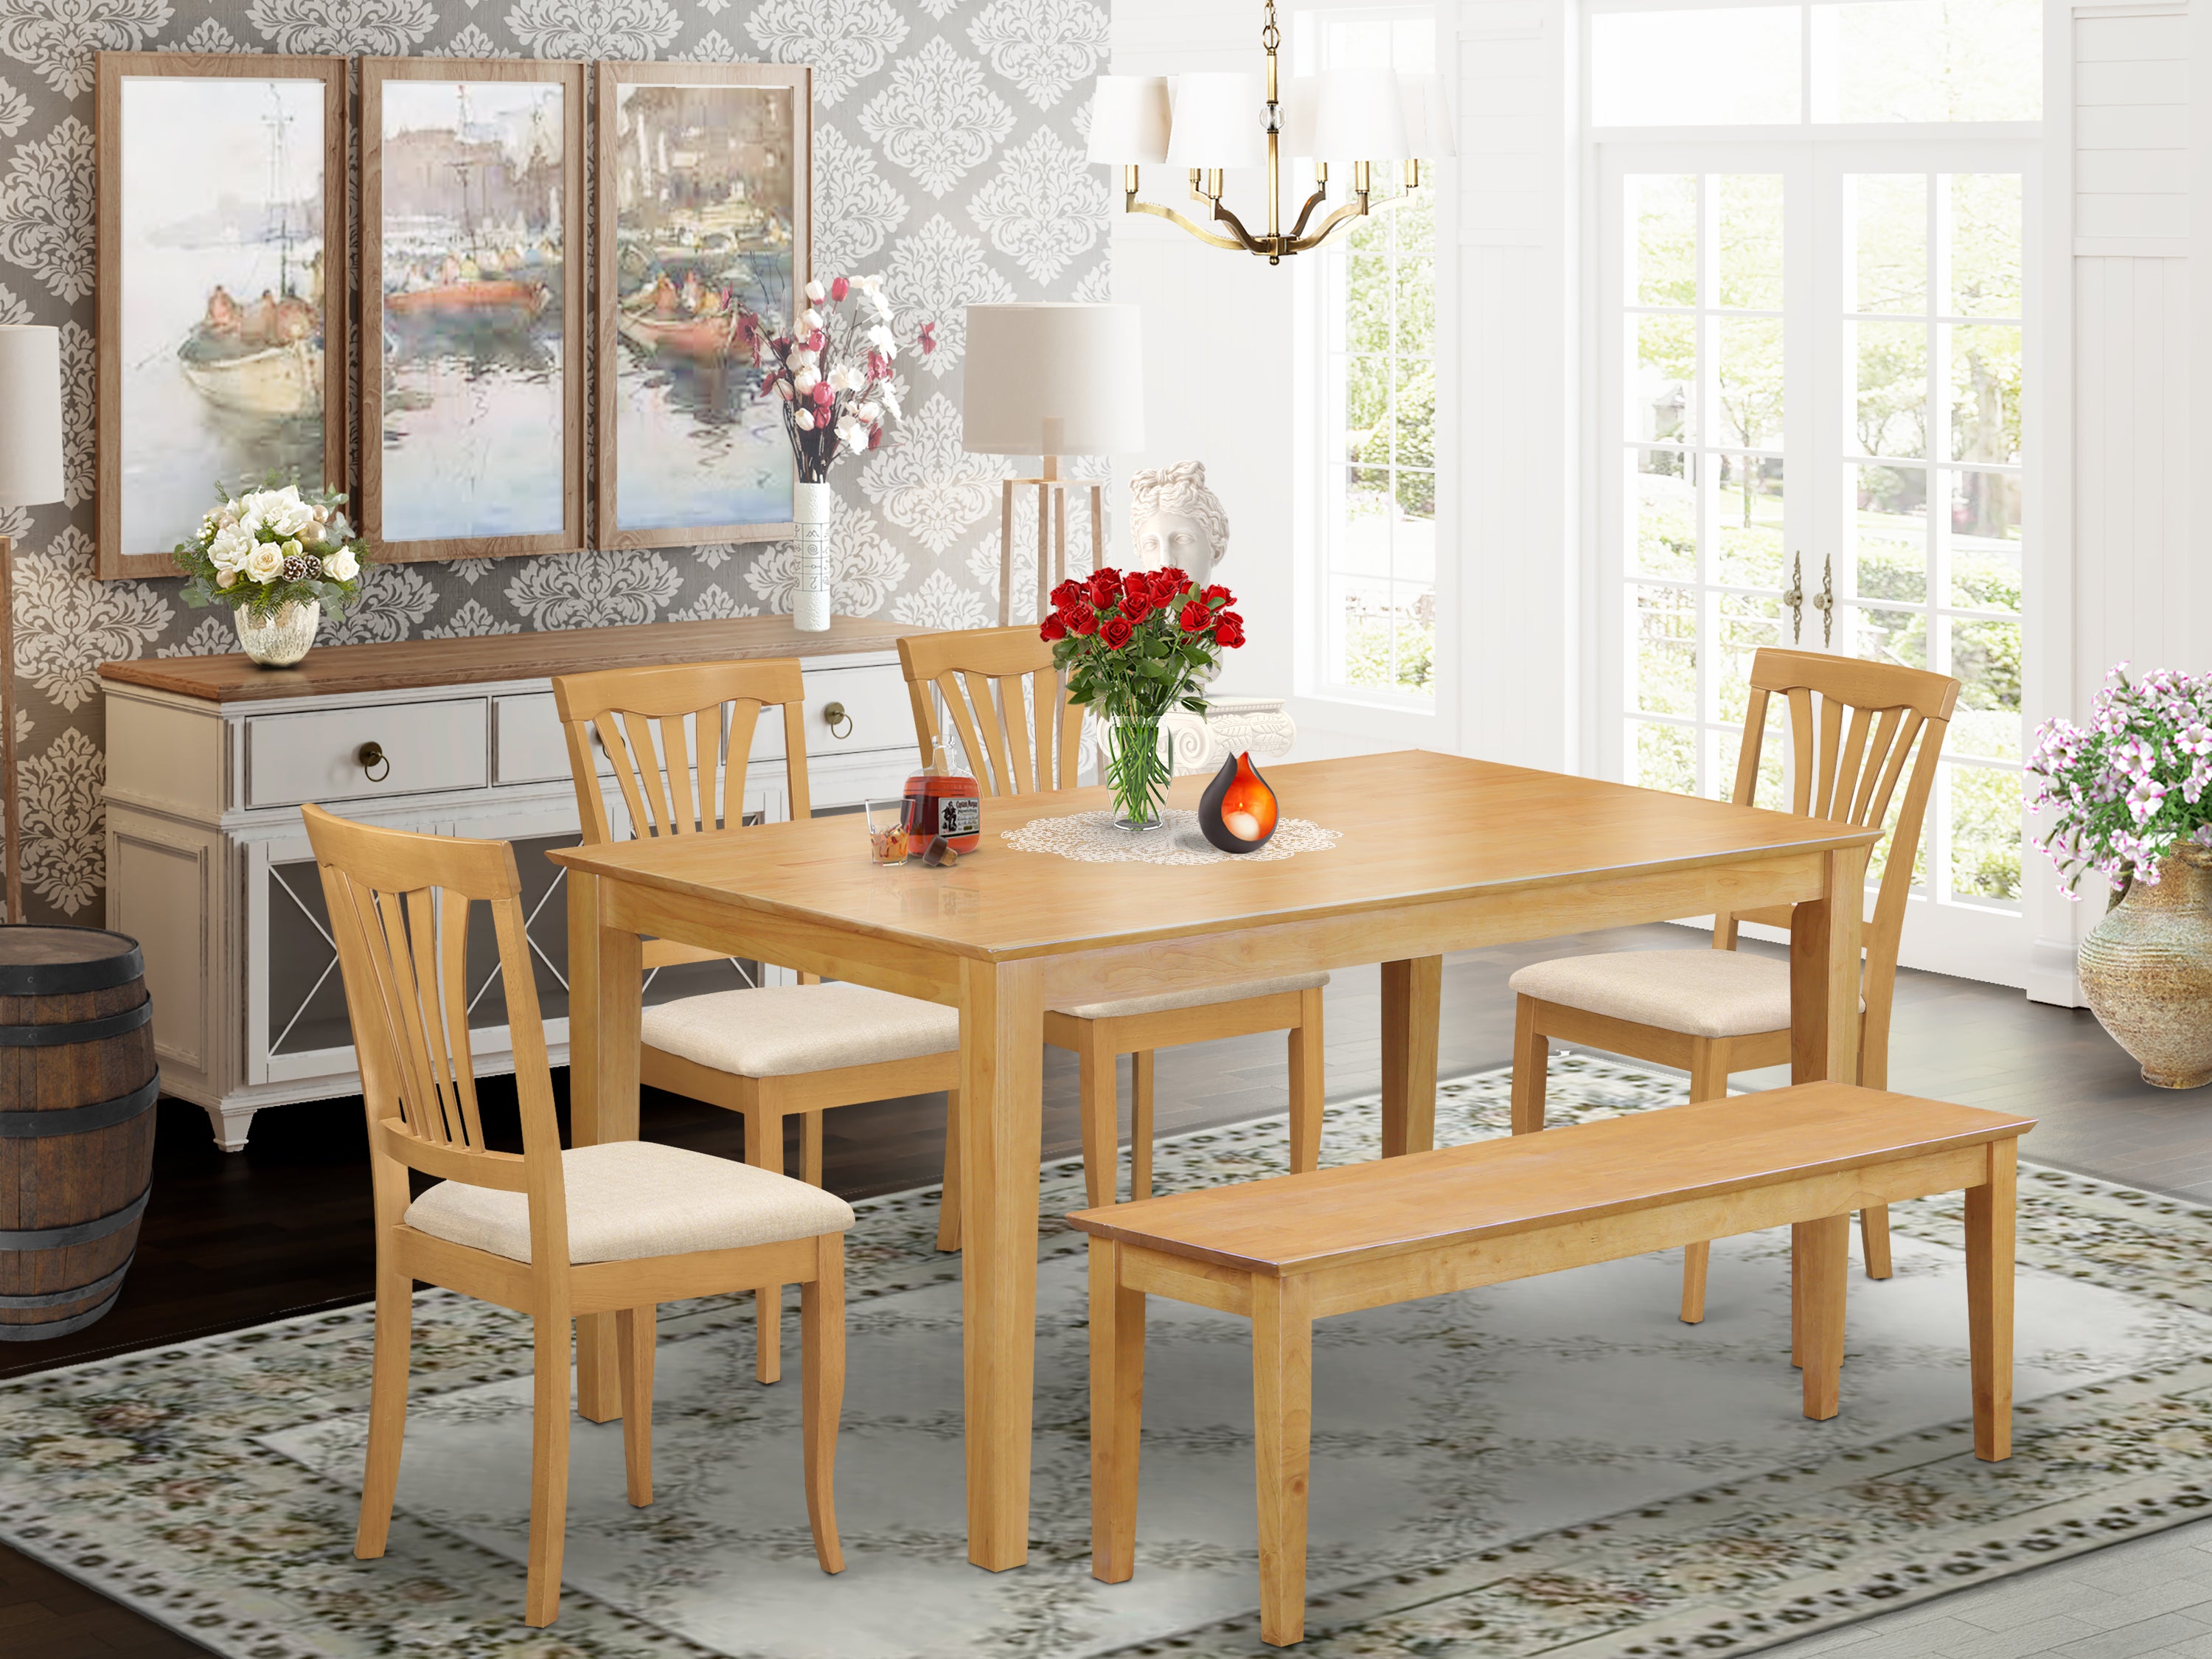 CAAV6-OAK-C 6-Pc Dinette set - Kitchen dinette Table and 4 Dining Chairs plus Wooden bench